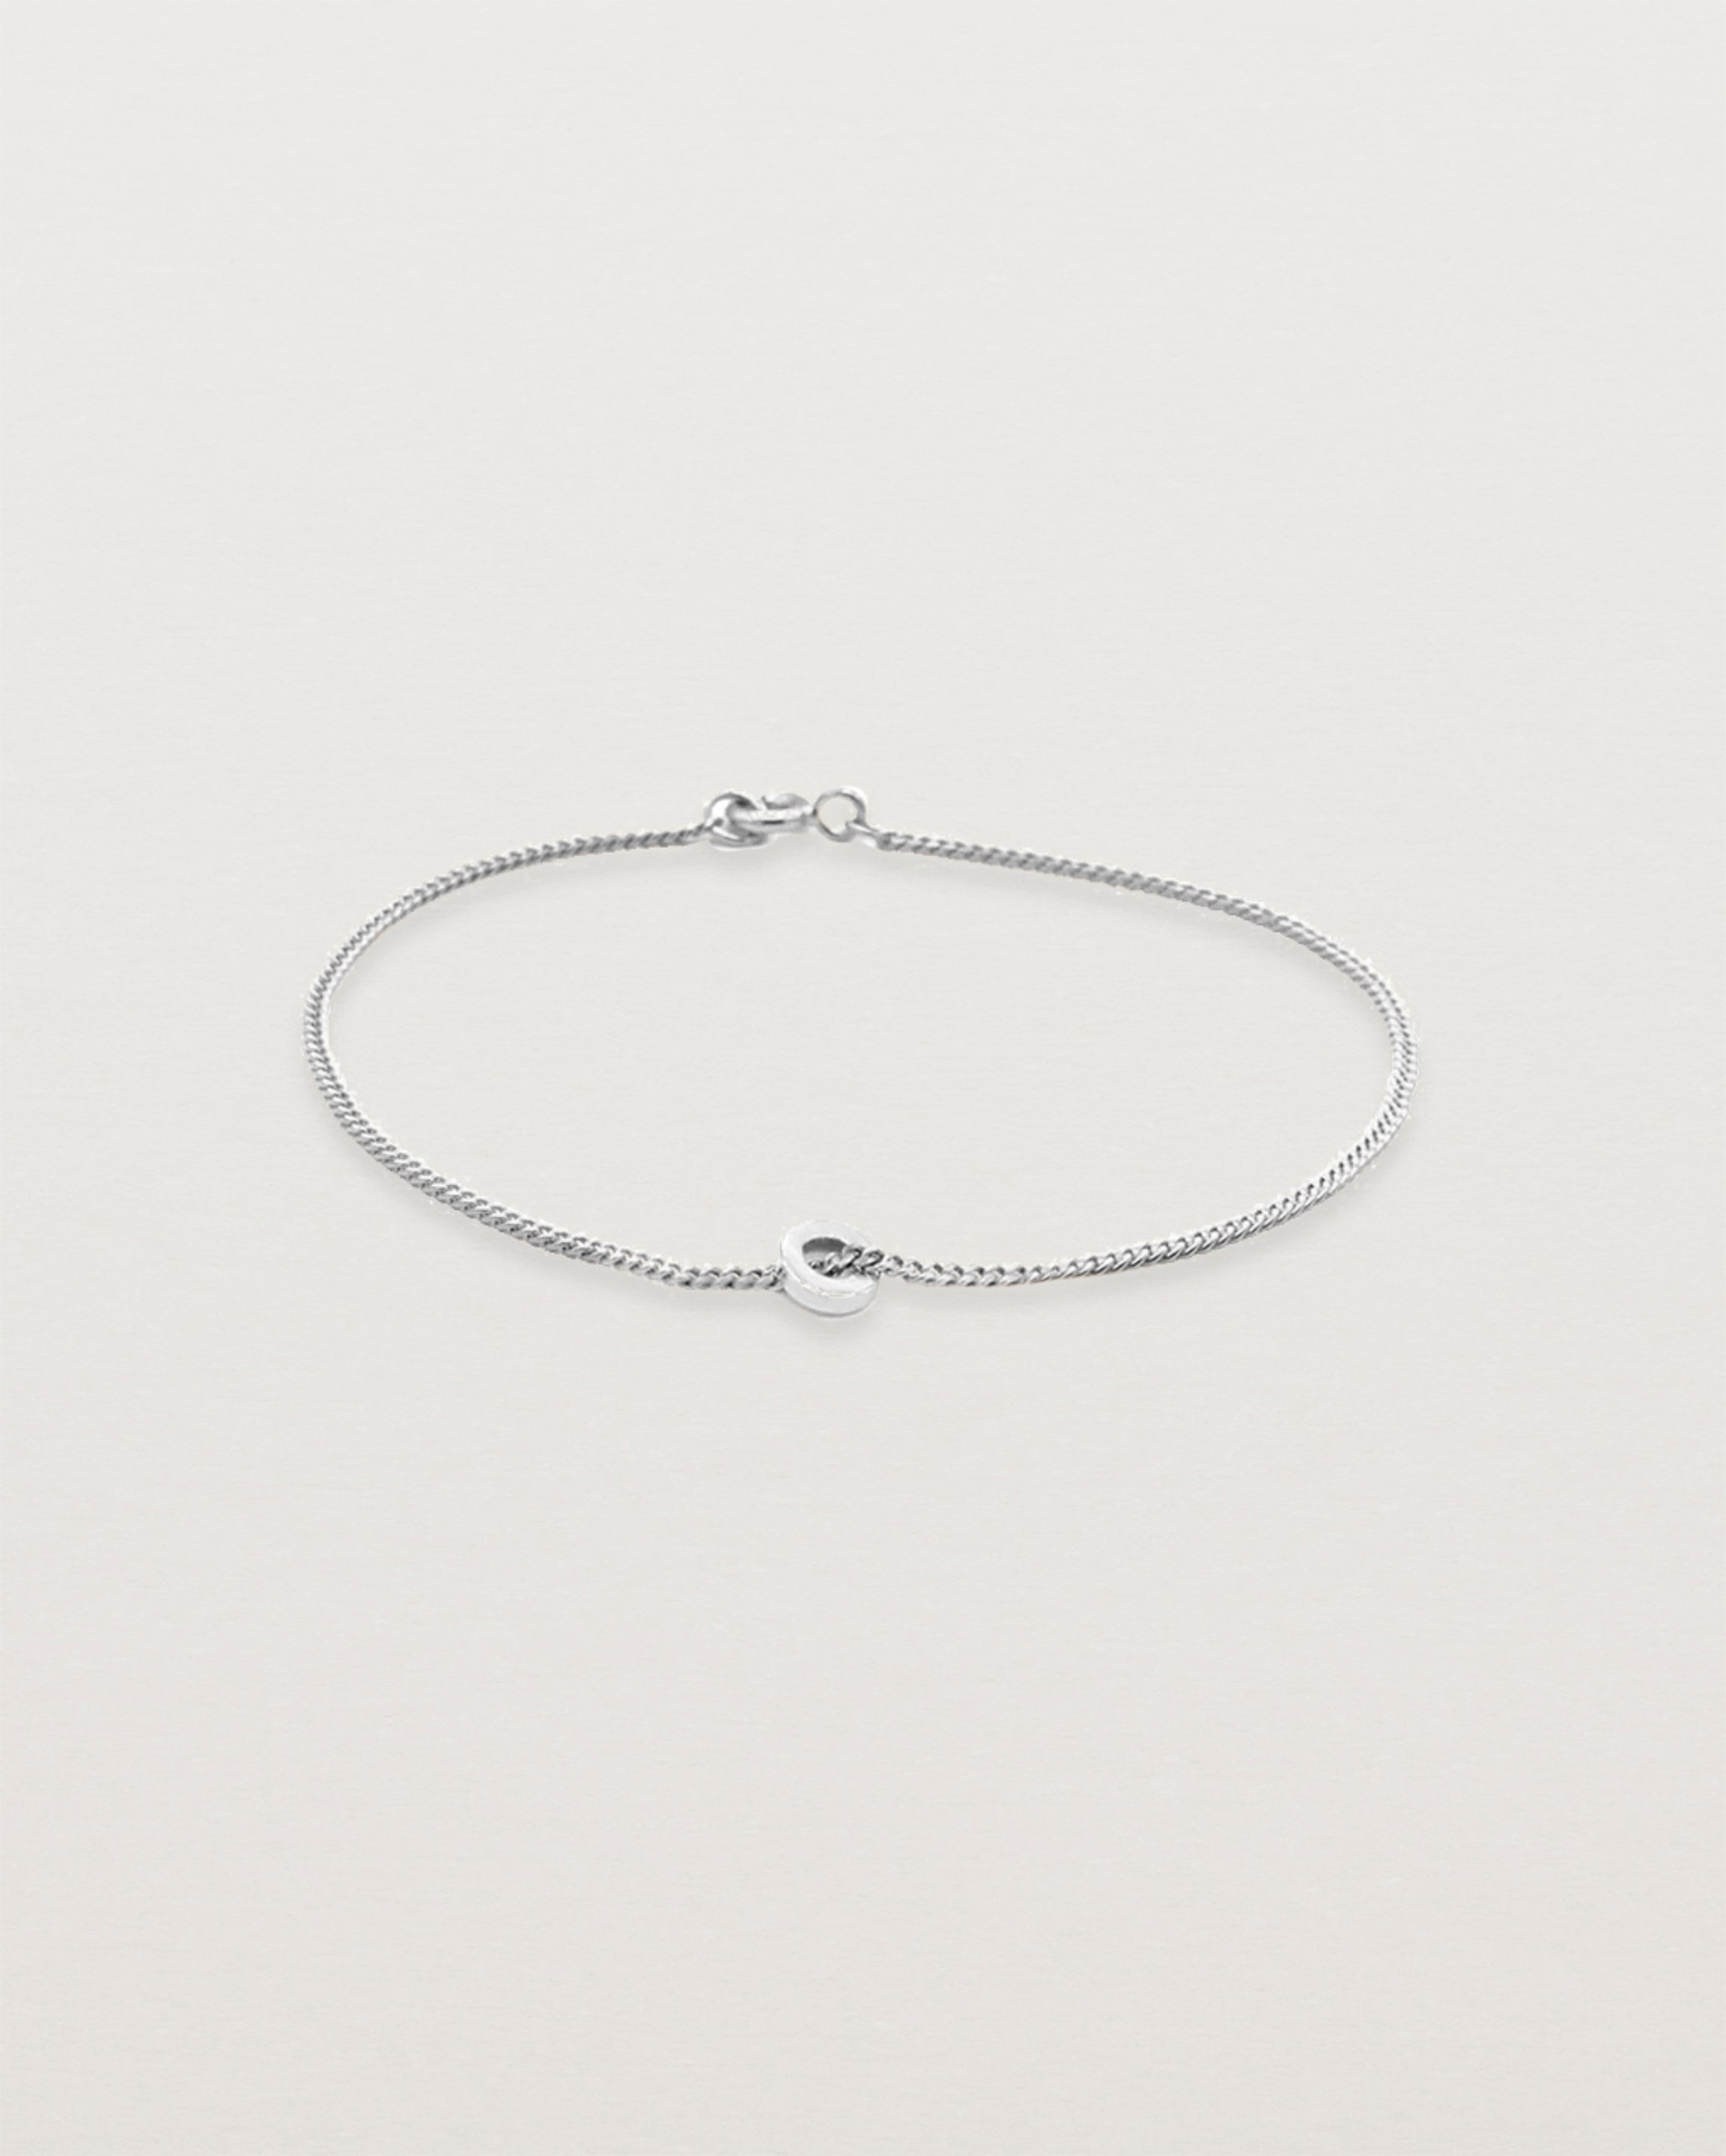 A fine sterling silver chain bracelet featuring a sterling silver circular charm